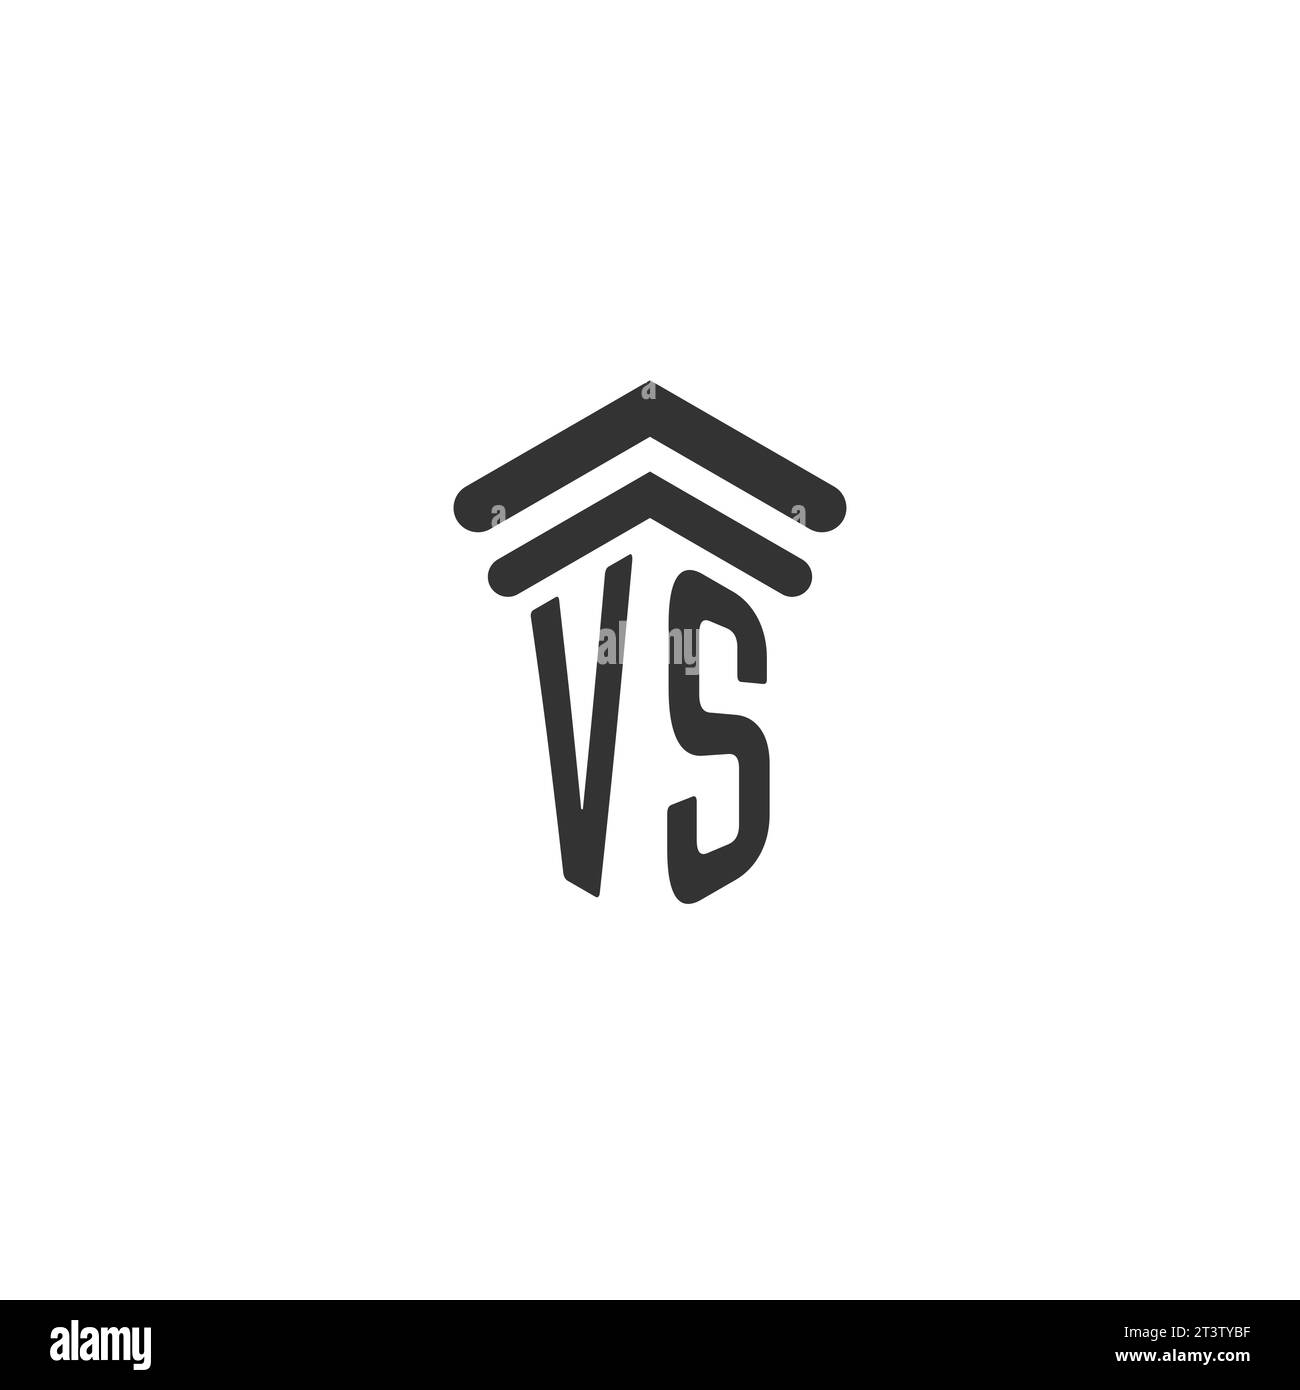 VS initial for law firm logo design template Stock Vector